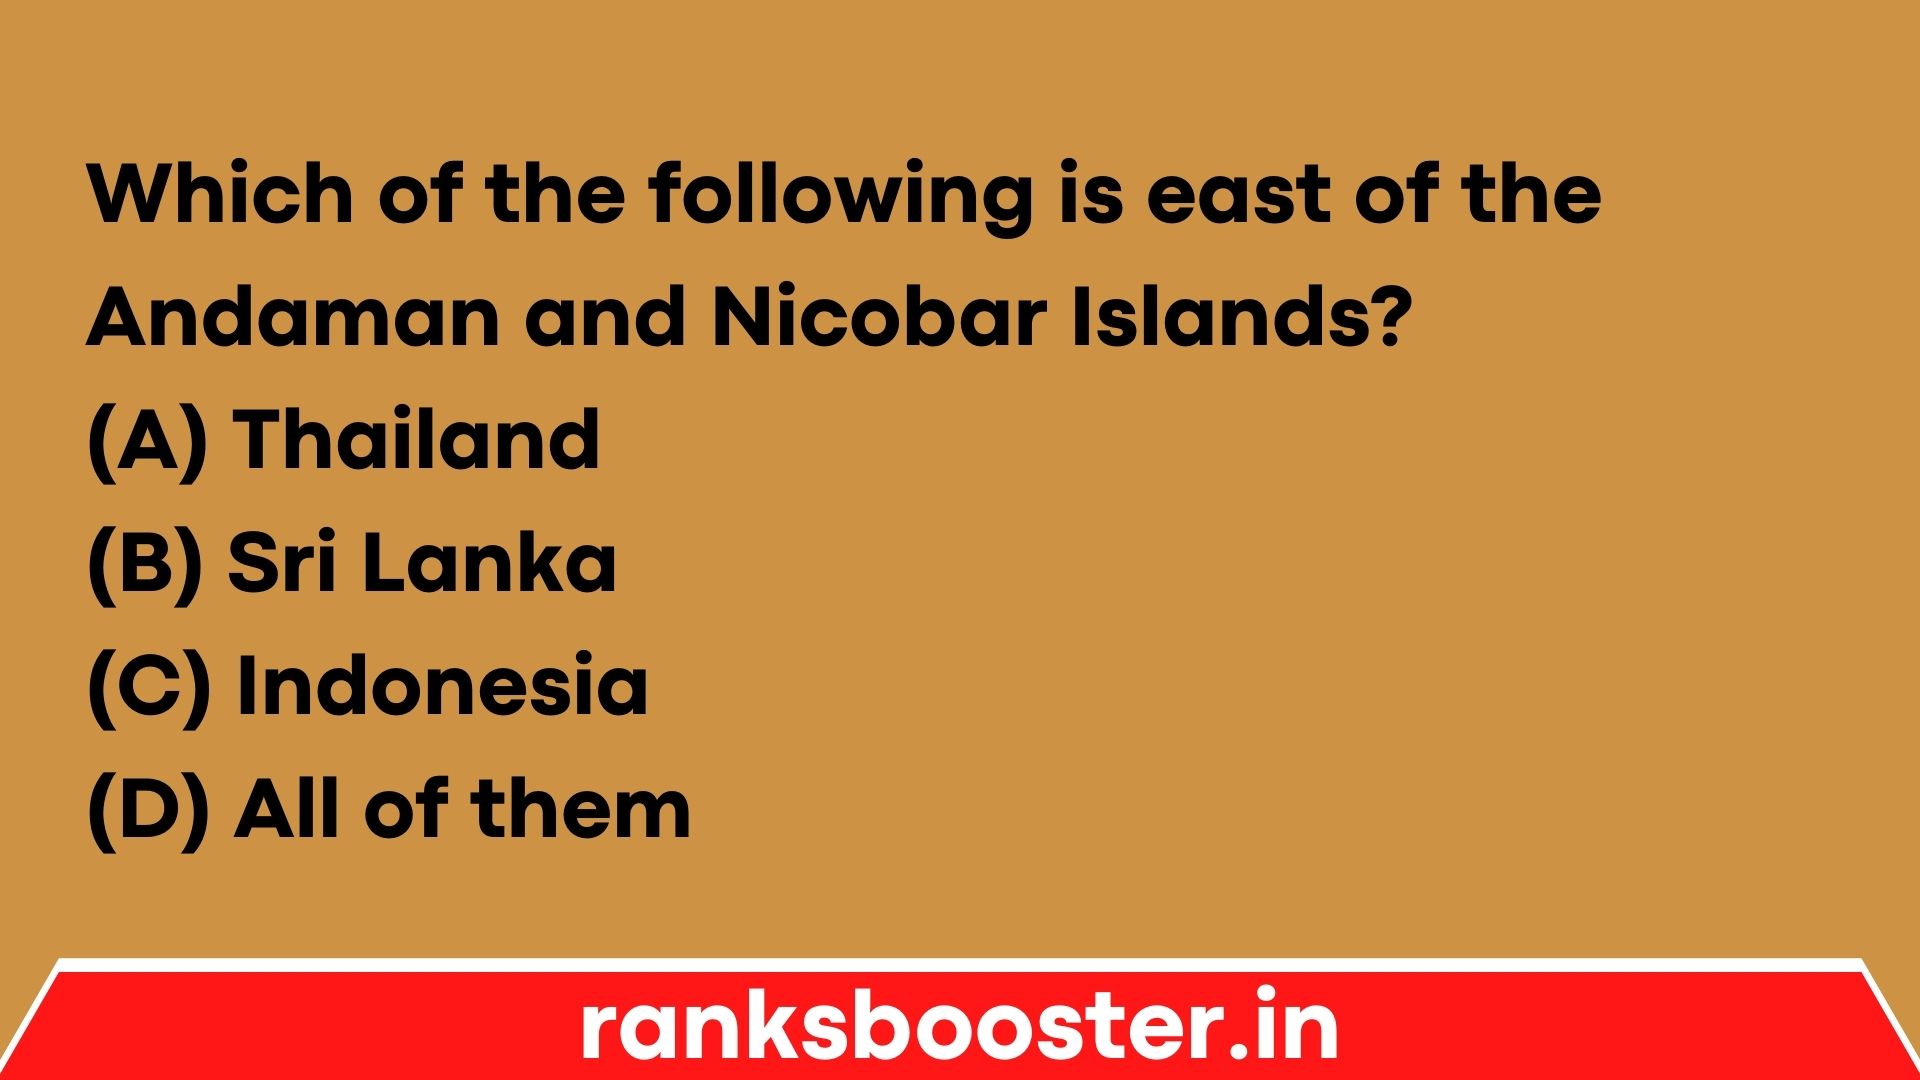 Which of the following is east of the Andaman and Nicobar Islands? (A) Thailand (B) Sri Lanka (C) Indonesia (D) All of them